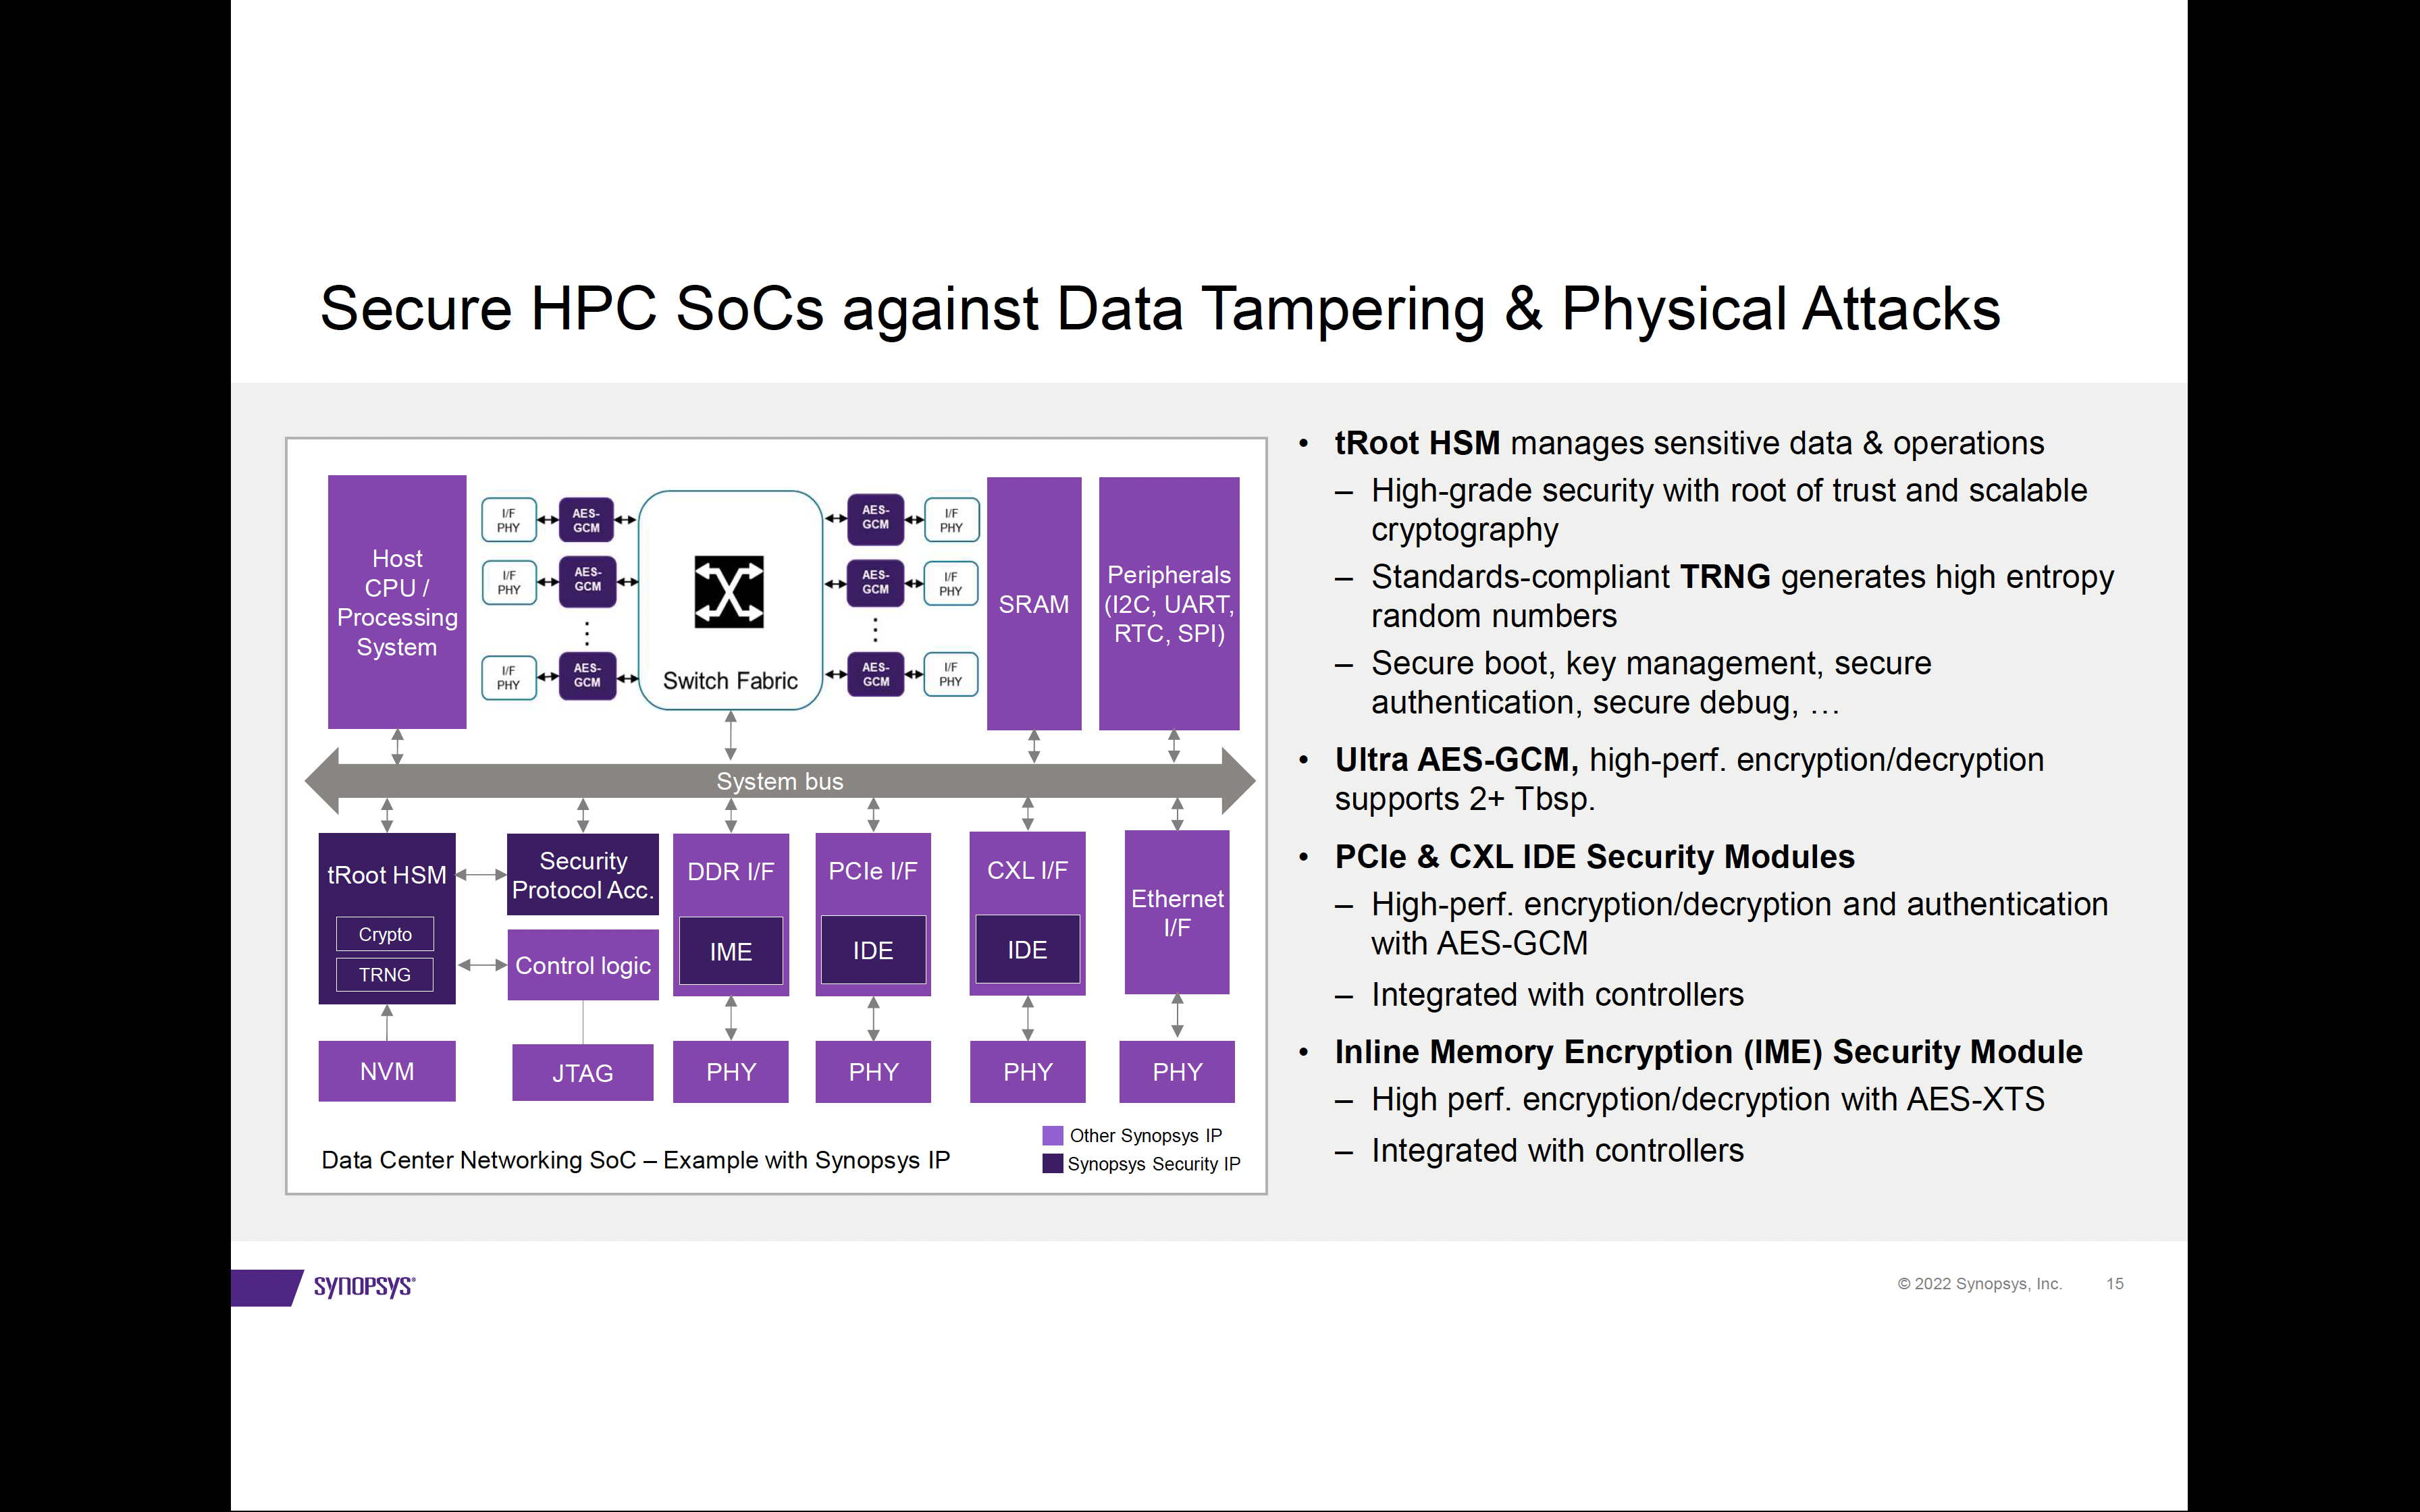 Secure HPC SoCs against Data Tampering and Physical Attacks